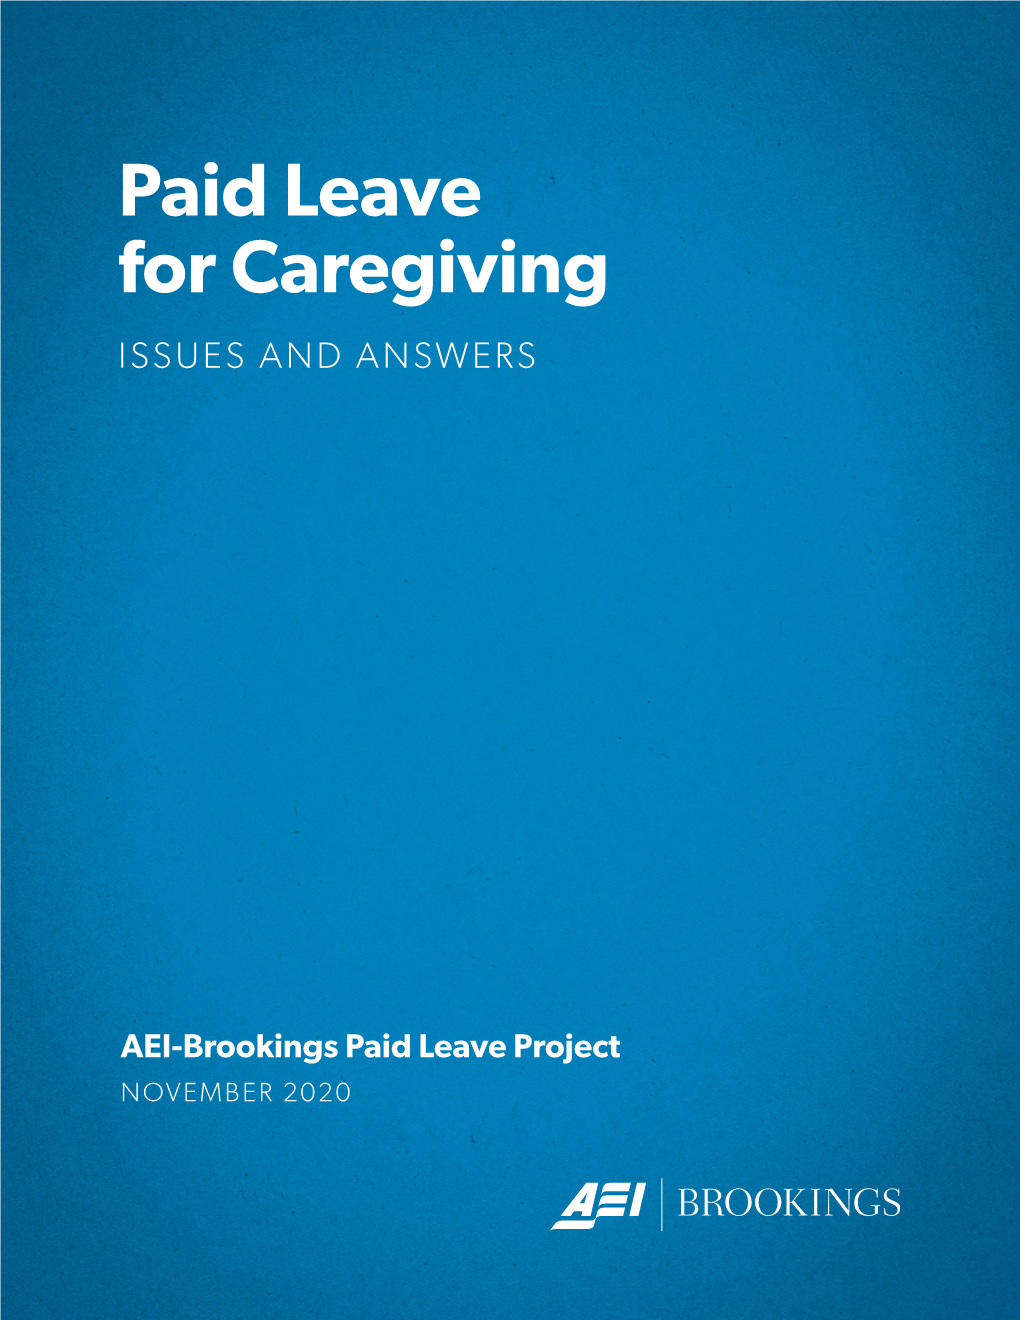 Paid Leave for Caregiving ISSUES and ANSWERS